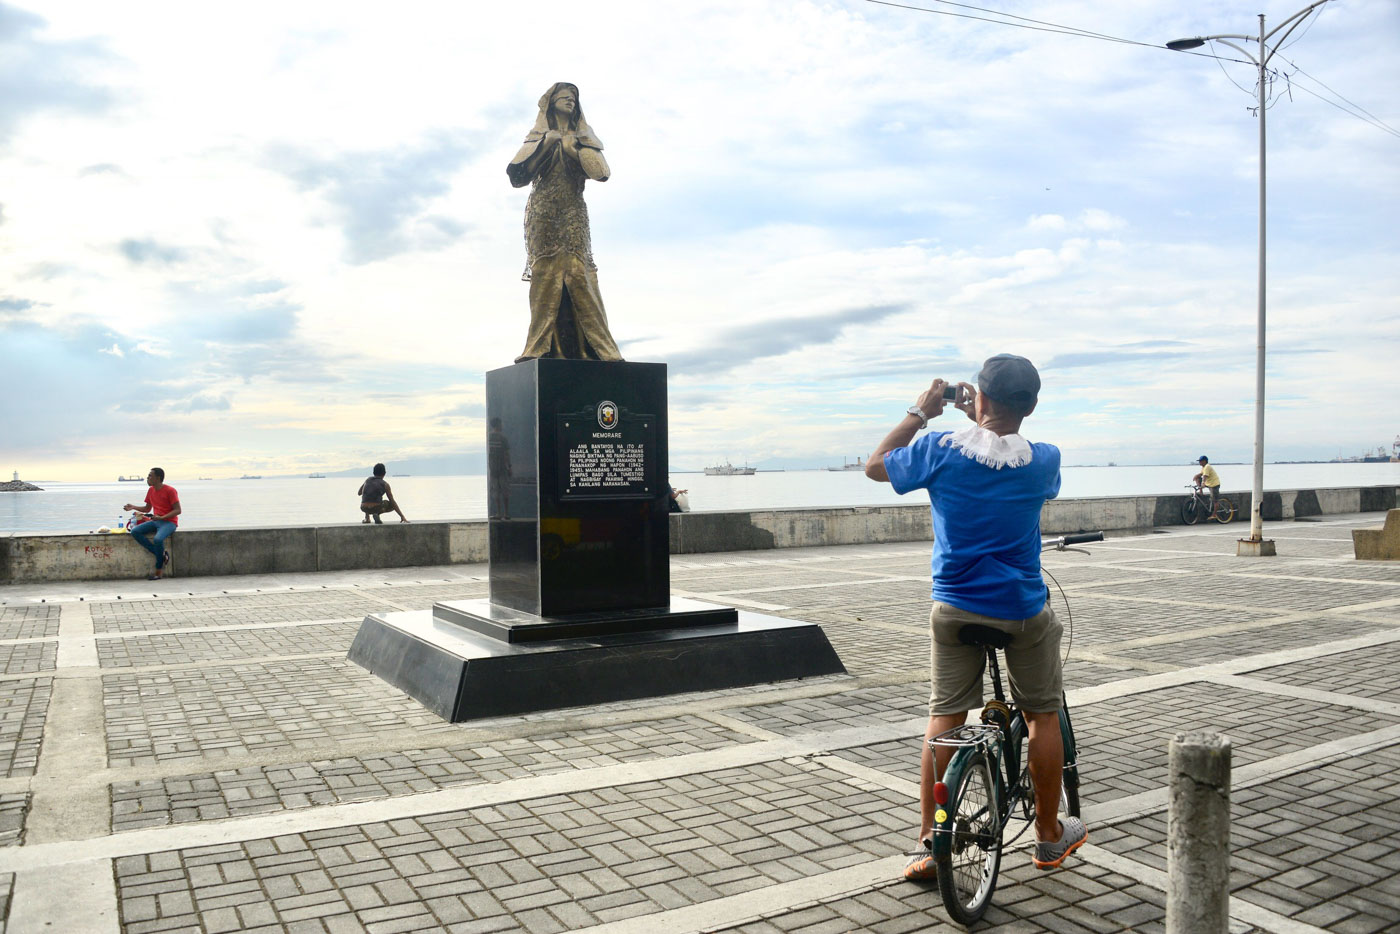 TOURIST ATTRACTION. Controversies aside, the comfort woman statue along Roxas Boulevard has drawn the attention of Manila's passersby. Photo by Angie de Silva/Rappler 